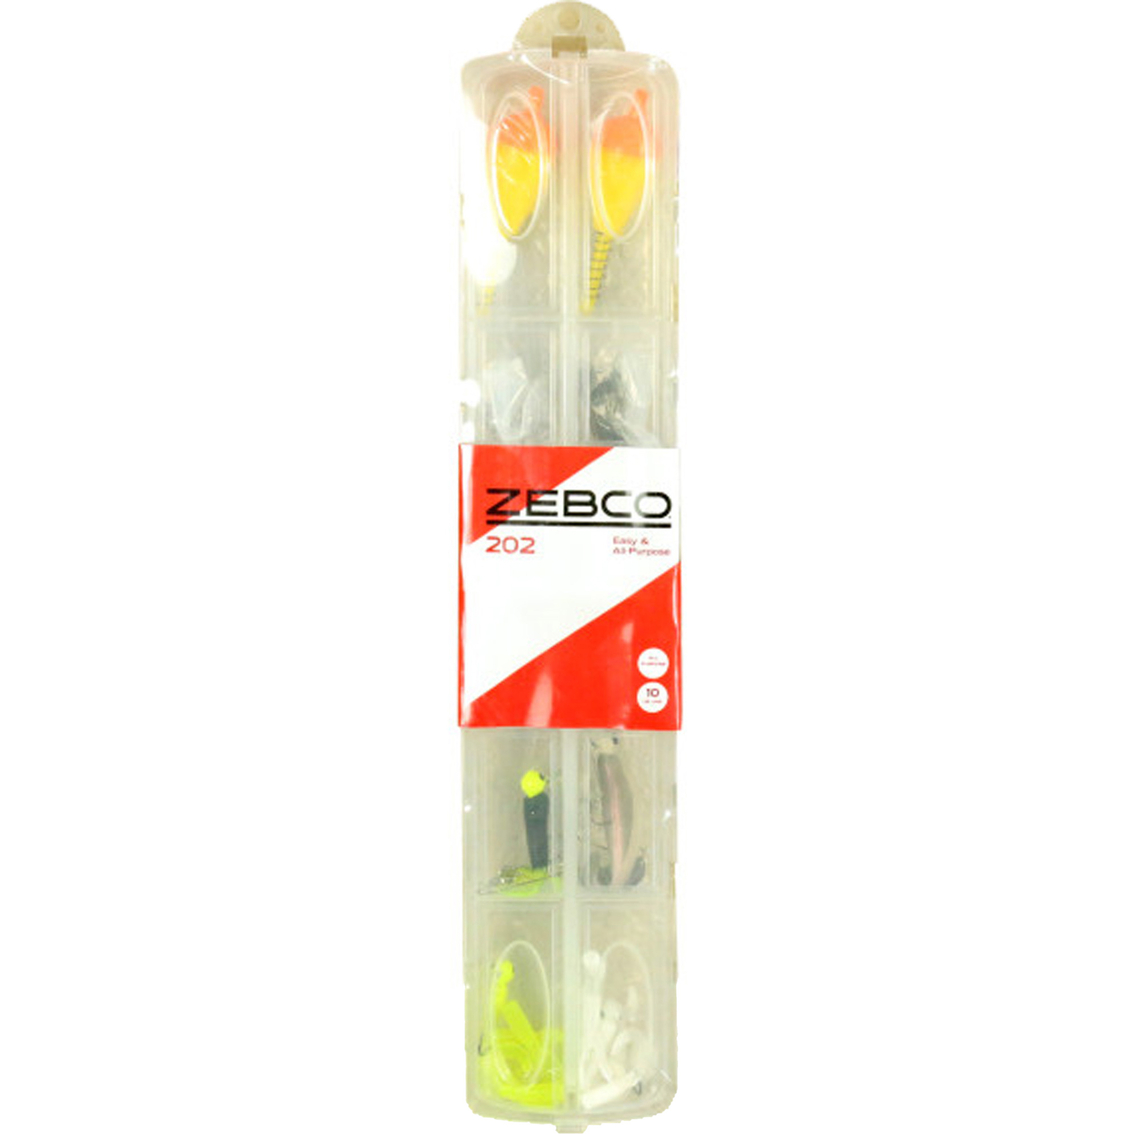 Zebco 202 562ml Spincast Combo Tackle 10 - Image 8 of 8